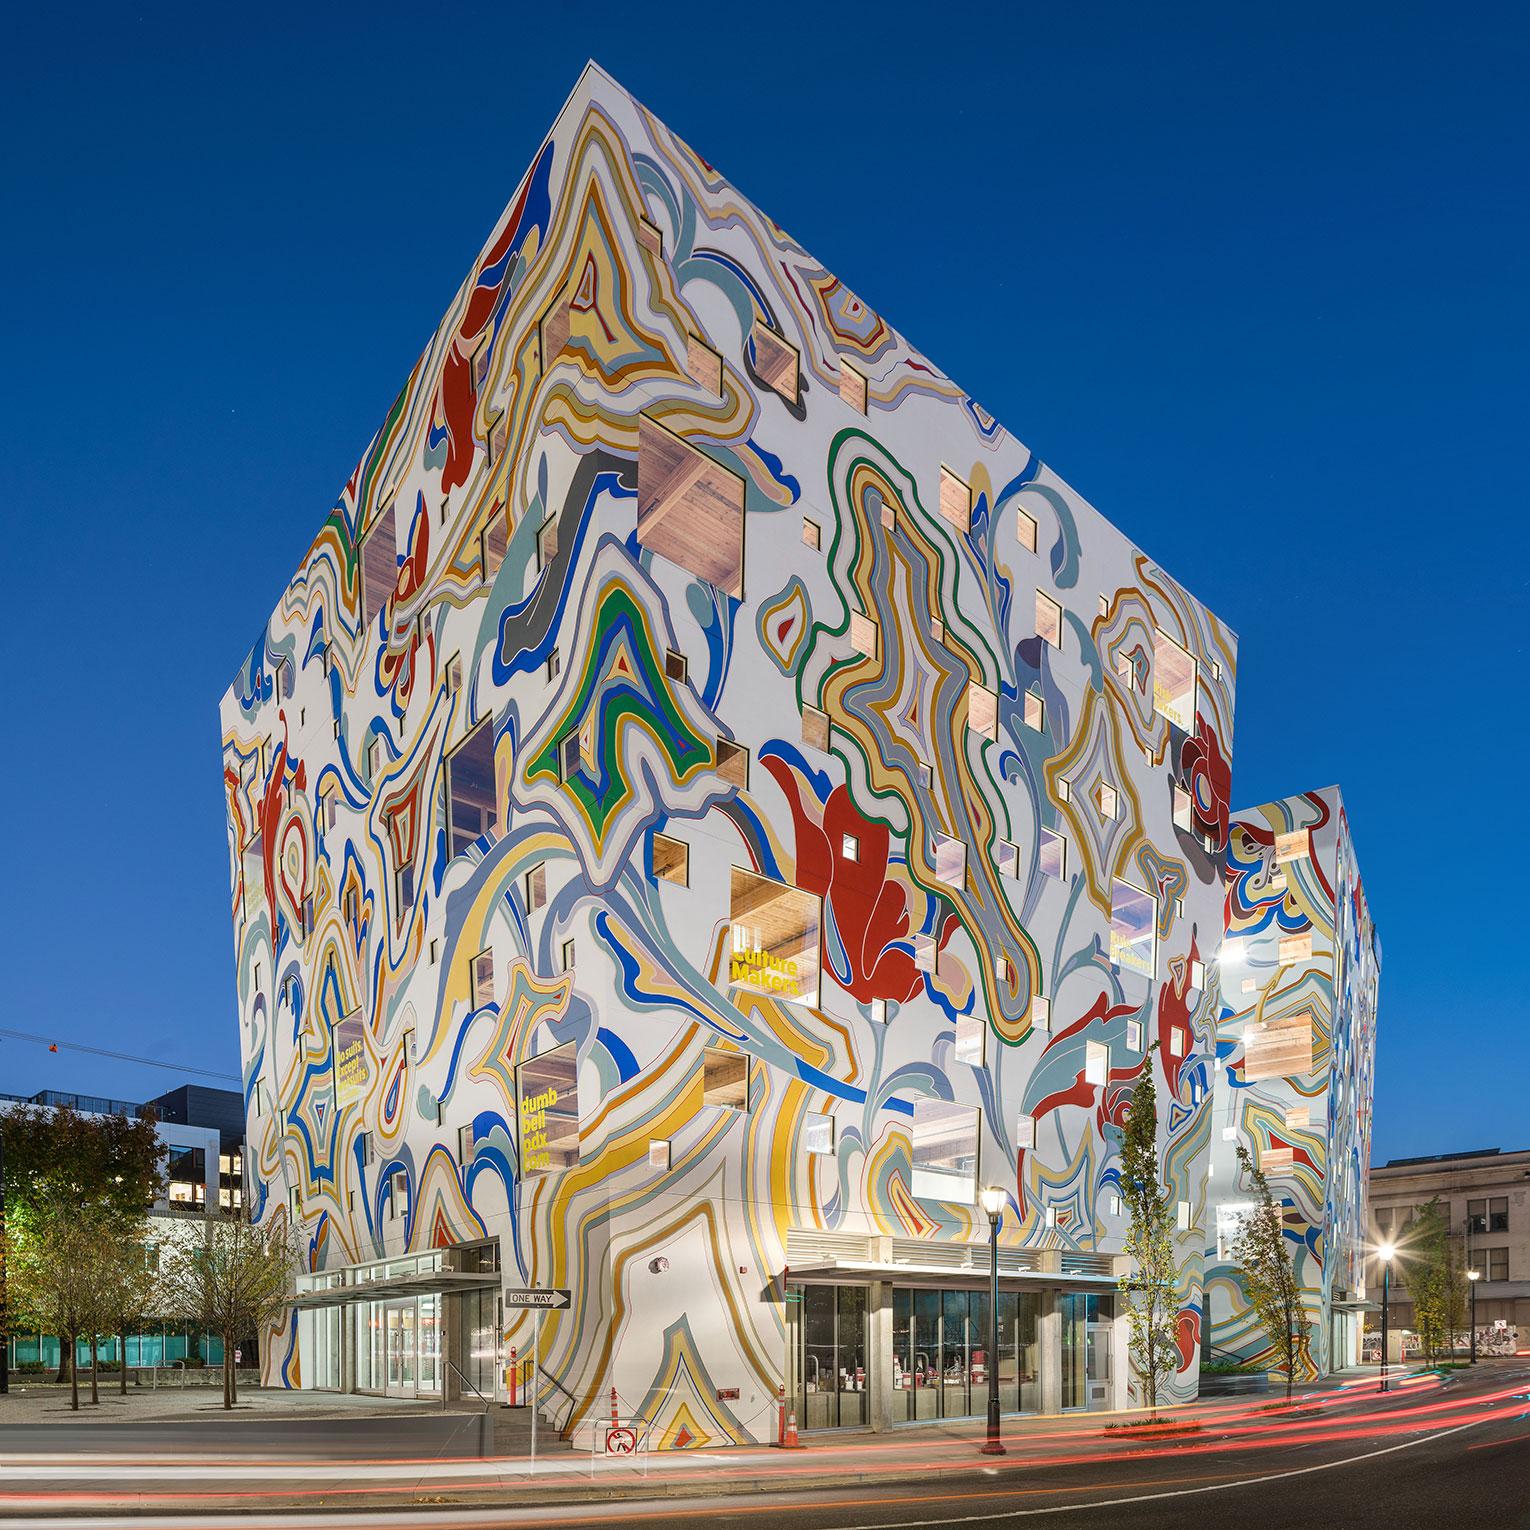 Dusk shot of the Fair-Haired Dumbbell. The six-story building is seen from the corner and the windows are of various sizes and are randomly placed. The exterior is completely covered with a colorful swirling mural abstractly representing flowers, geodes and leaves.